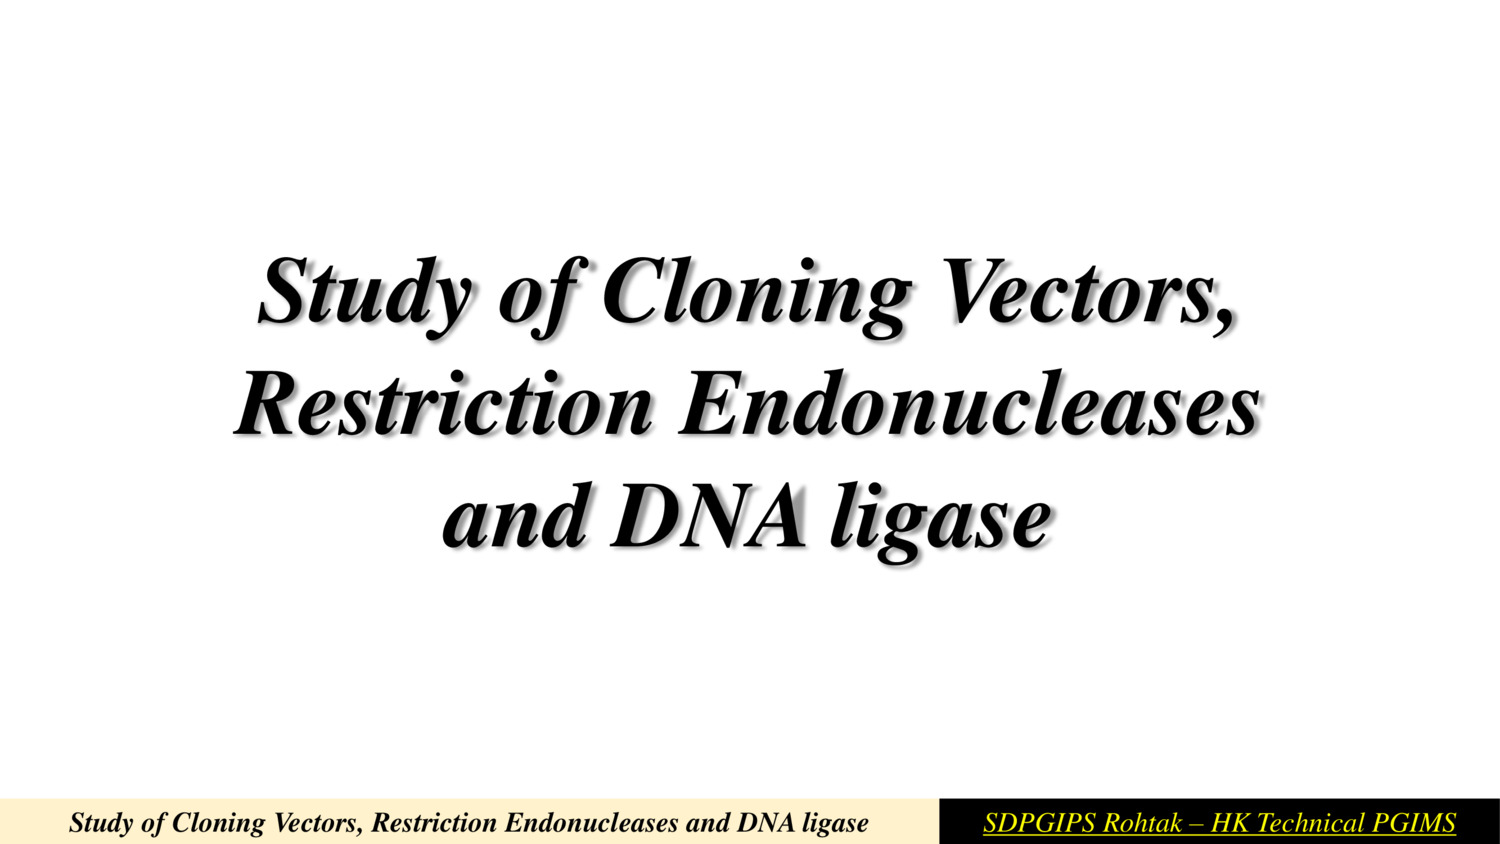 Study of Cloning Vectors, Restriction Endonucleases and DNA Ligase SlideShare 6th Semester B.Pharmacy Lecture Notes,BP605T Pharmaceutical Biotechnology,BPharmacy,Handwritten Notes,BPharm 6th Semester,Important Exam Notes,PPT,